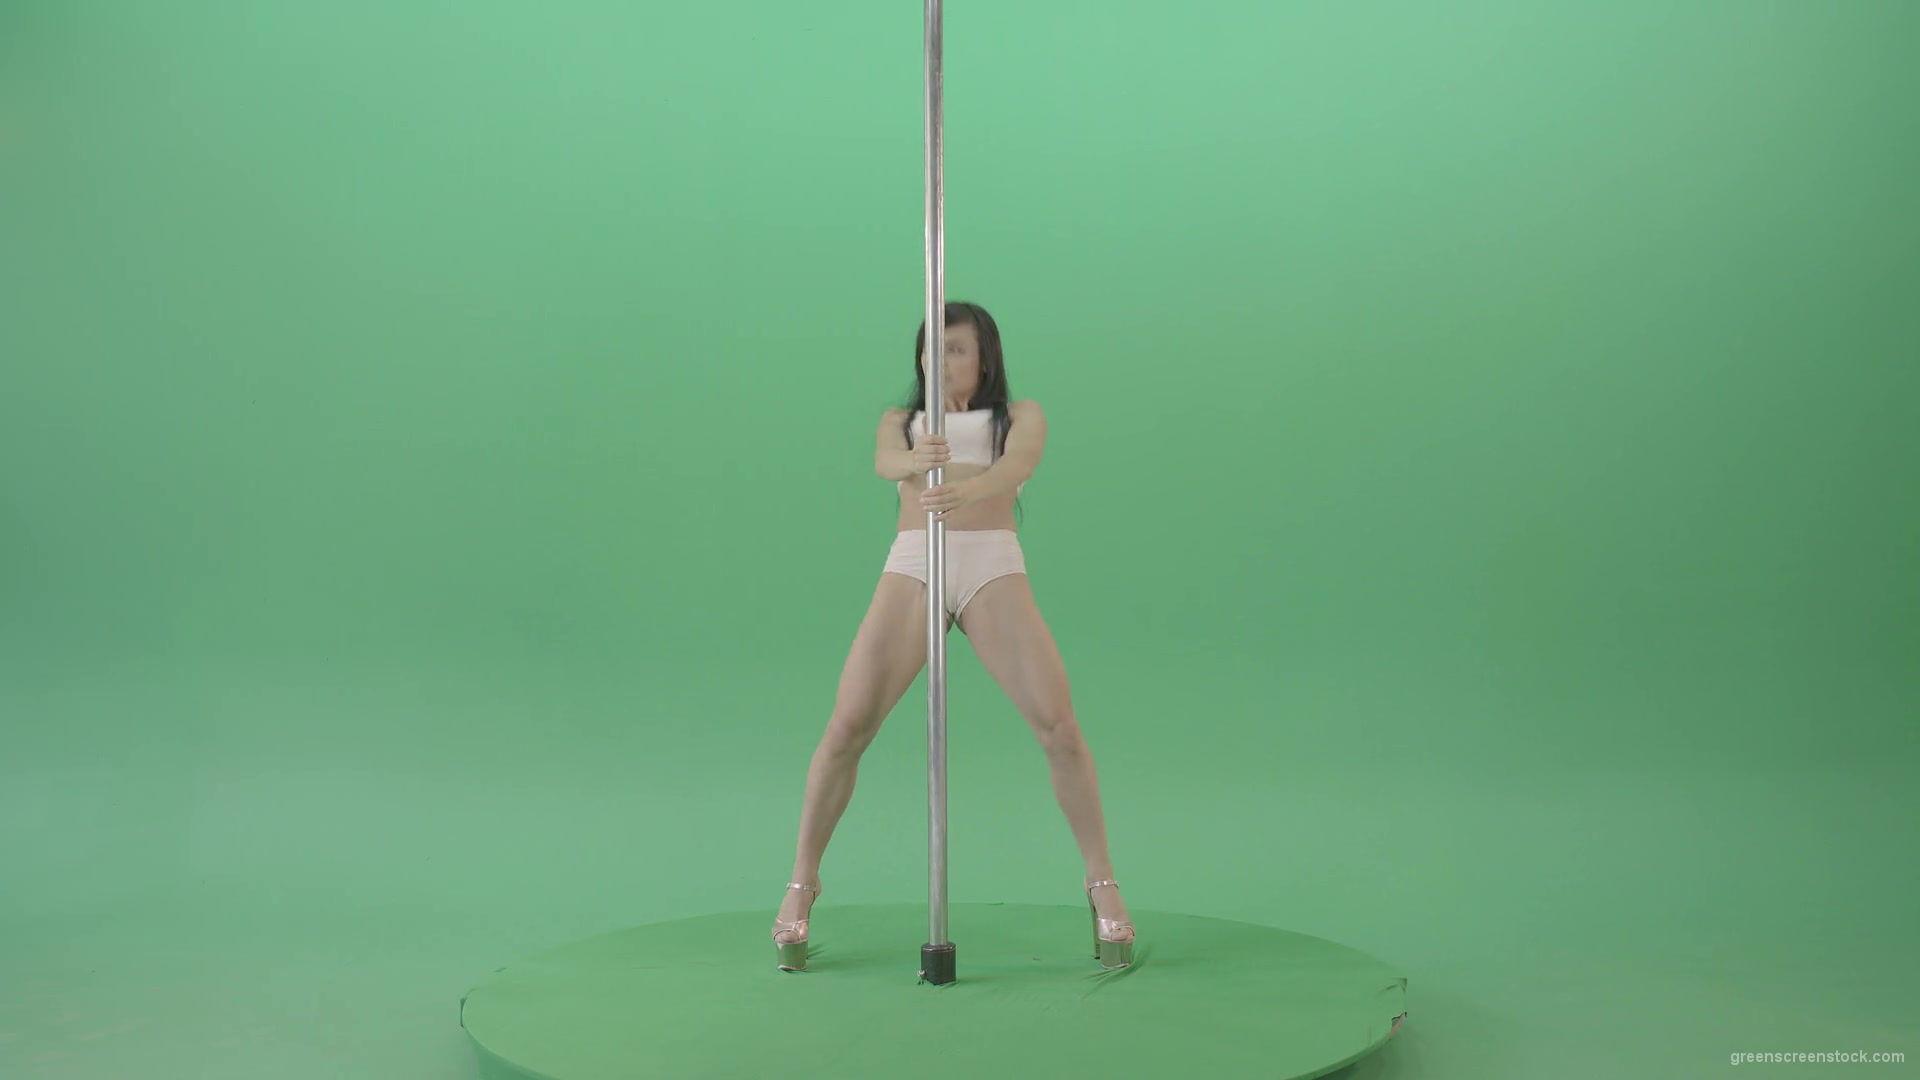 Pole-Dance-sport-girl-waving-sexy-body-isolated-on-green-screen-4K-Video-Footage-1920_008 Green Screen Stock